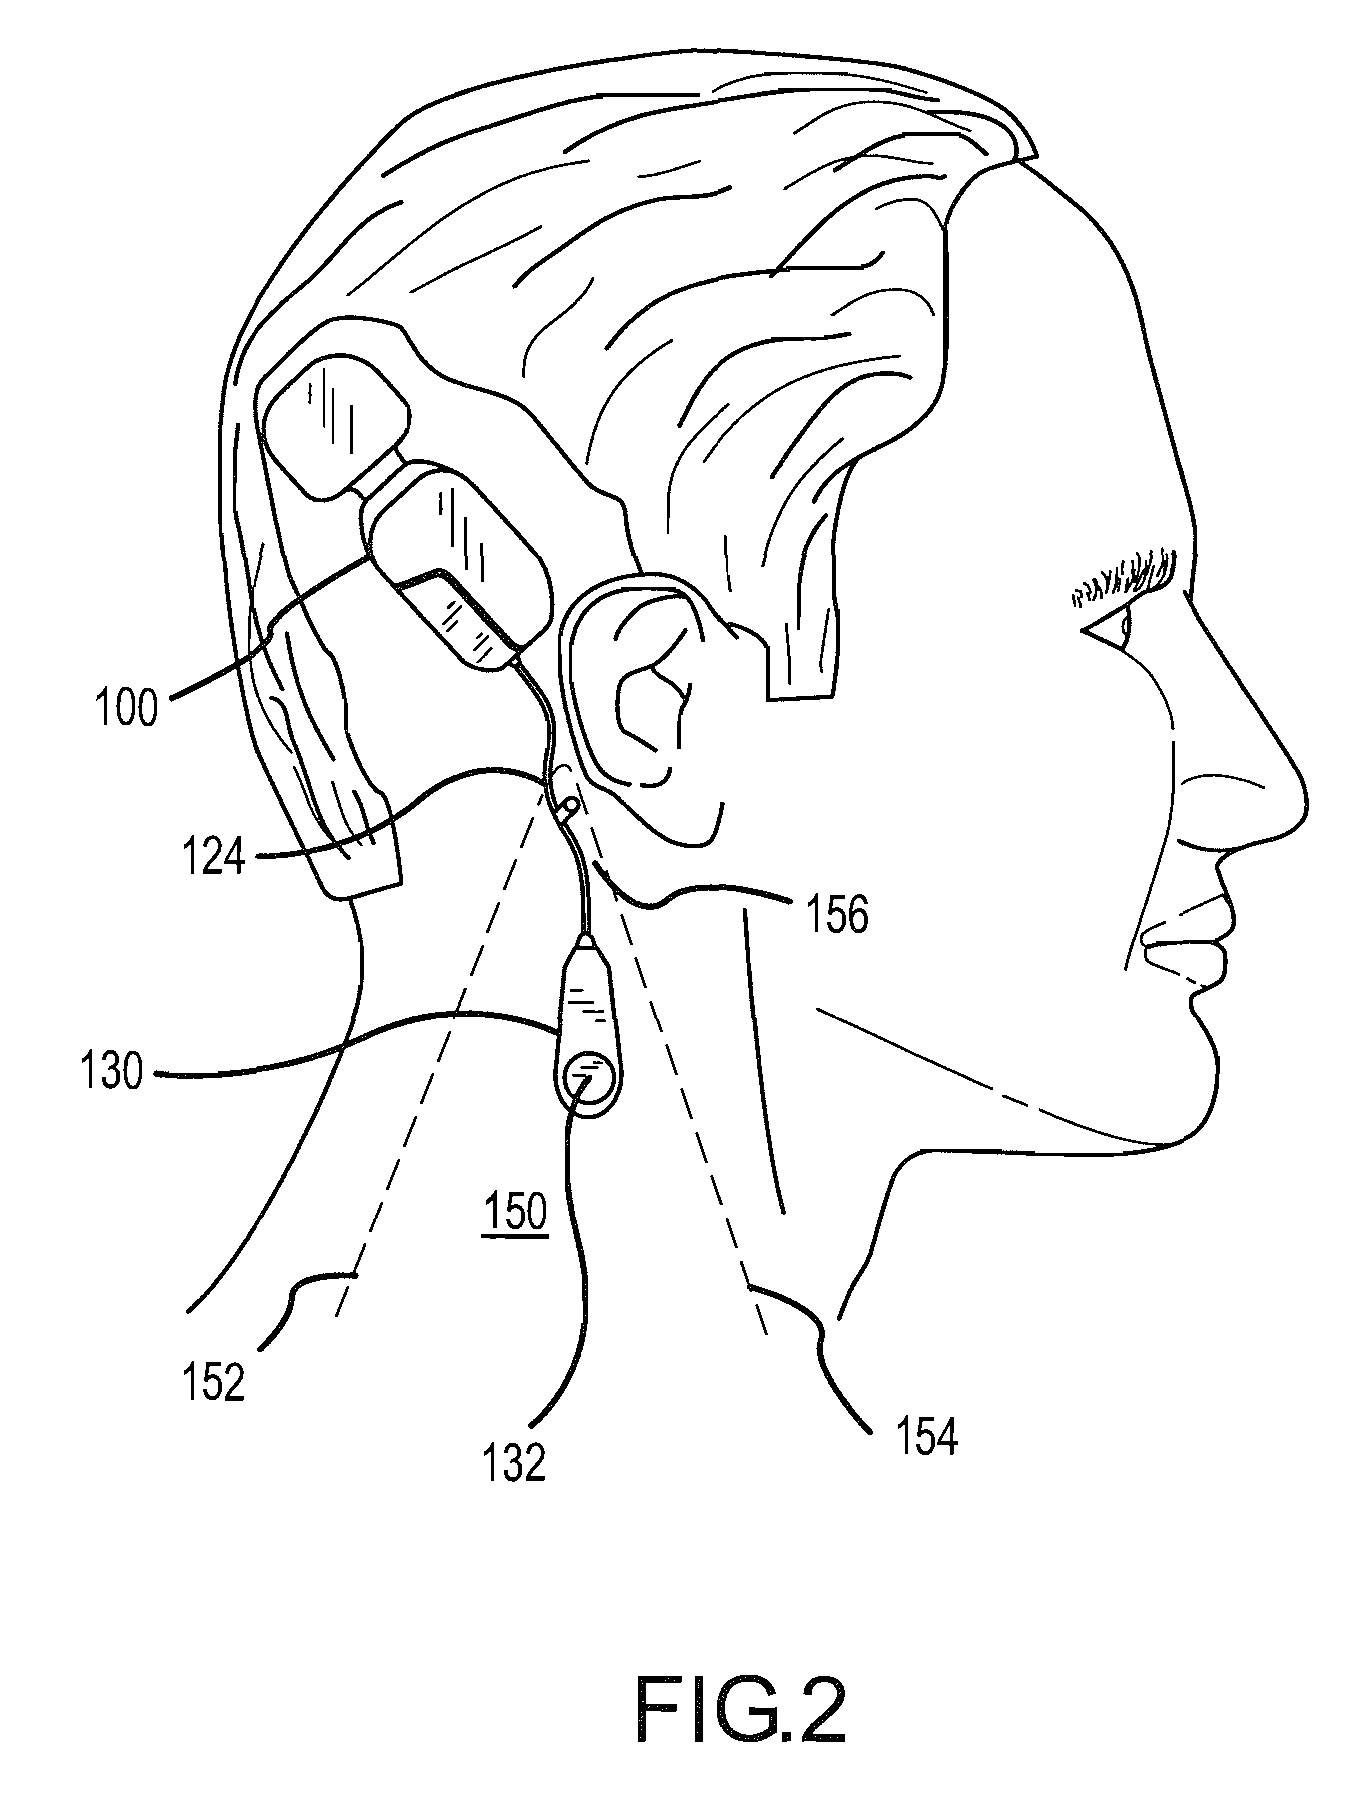 Soft tissue placement of implantable microphone